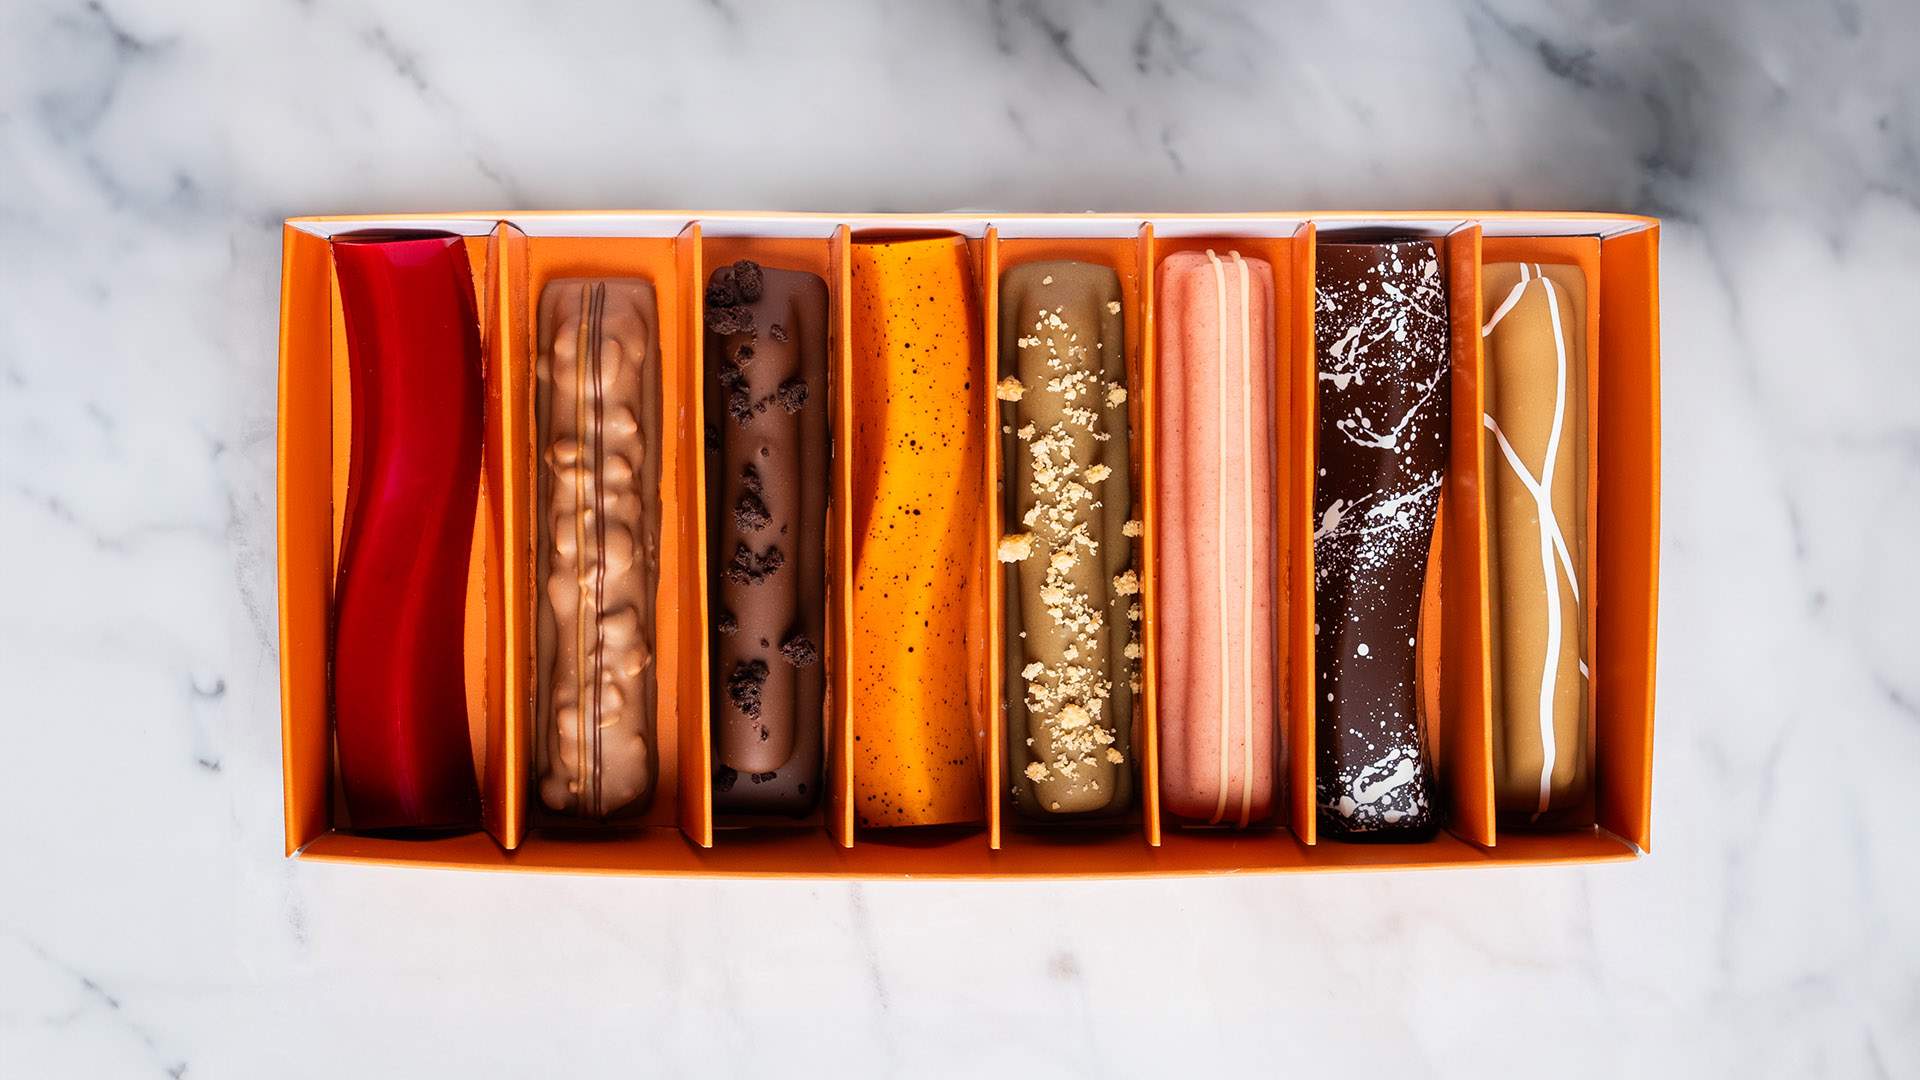 Gelato Messina Has Whipped Up Handmade Chocolate Bars for Mother's Day If You Want to Be Your Mum's Favourite